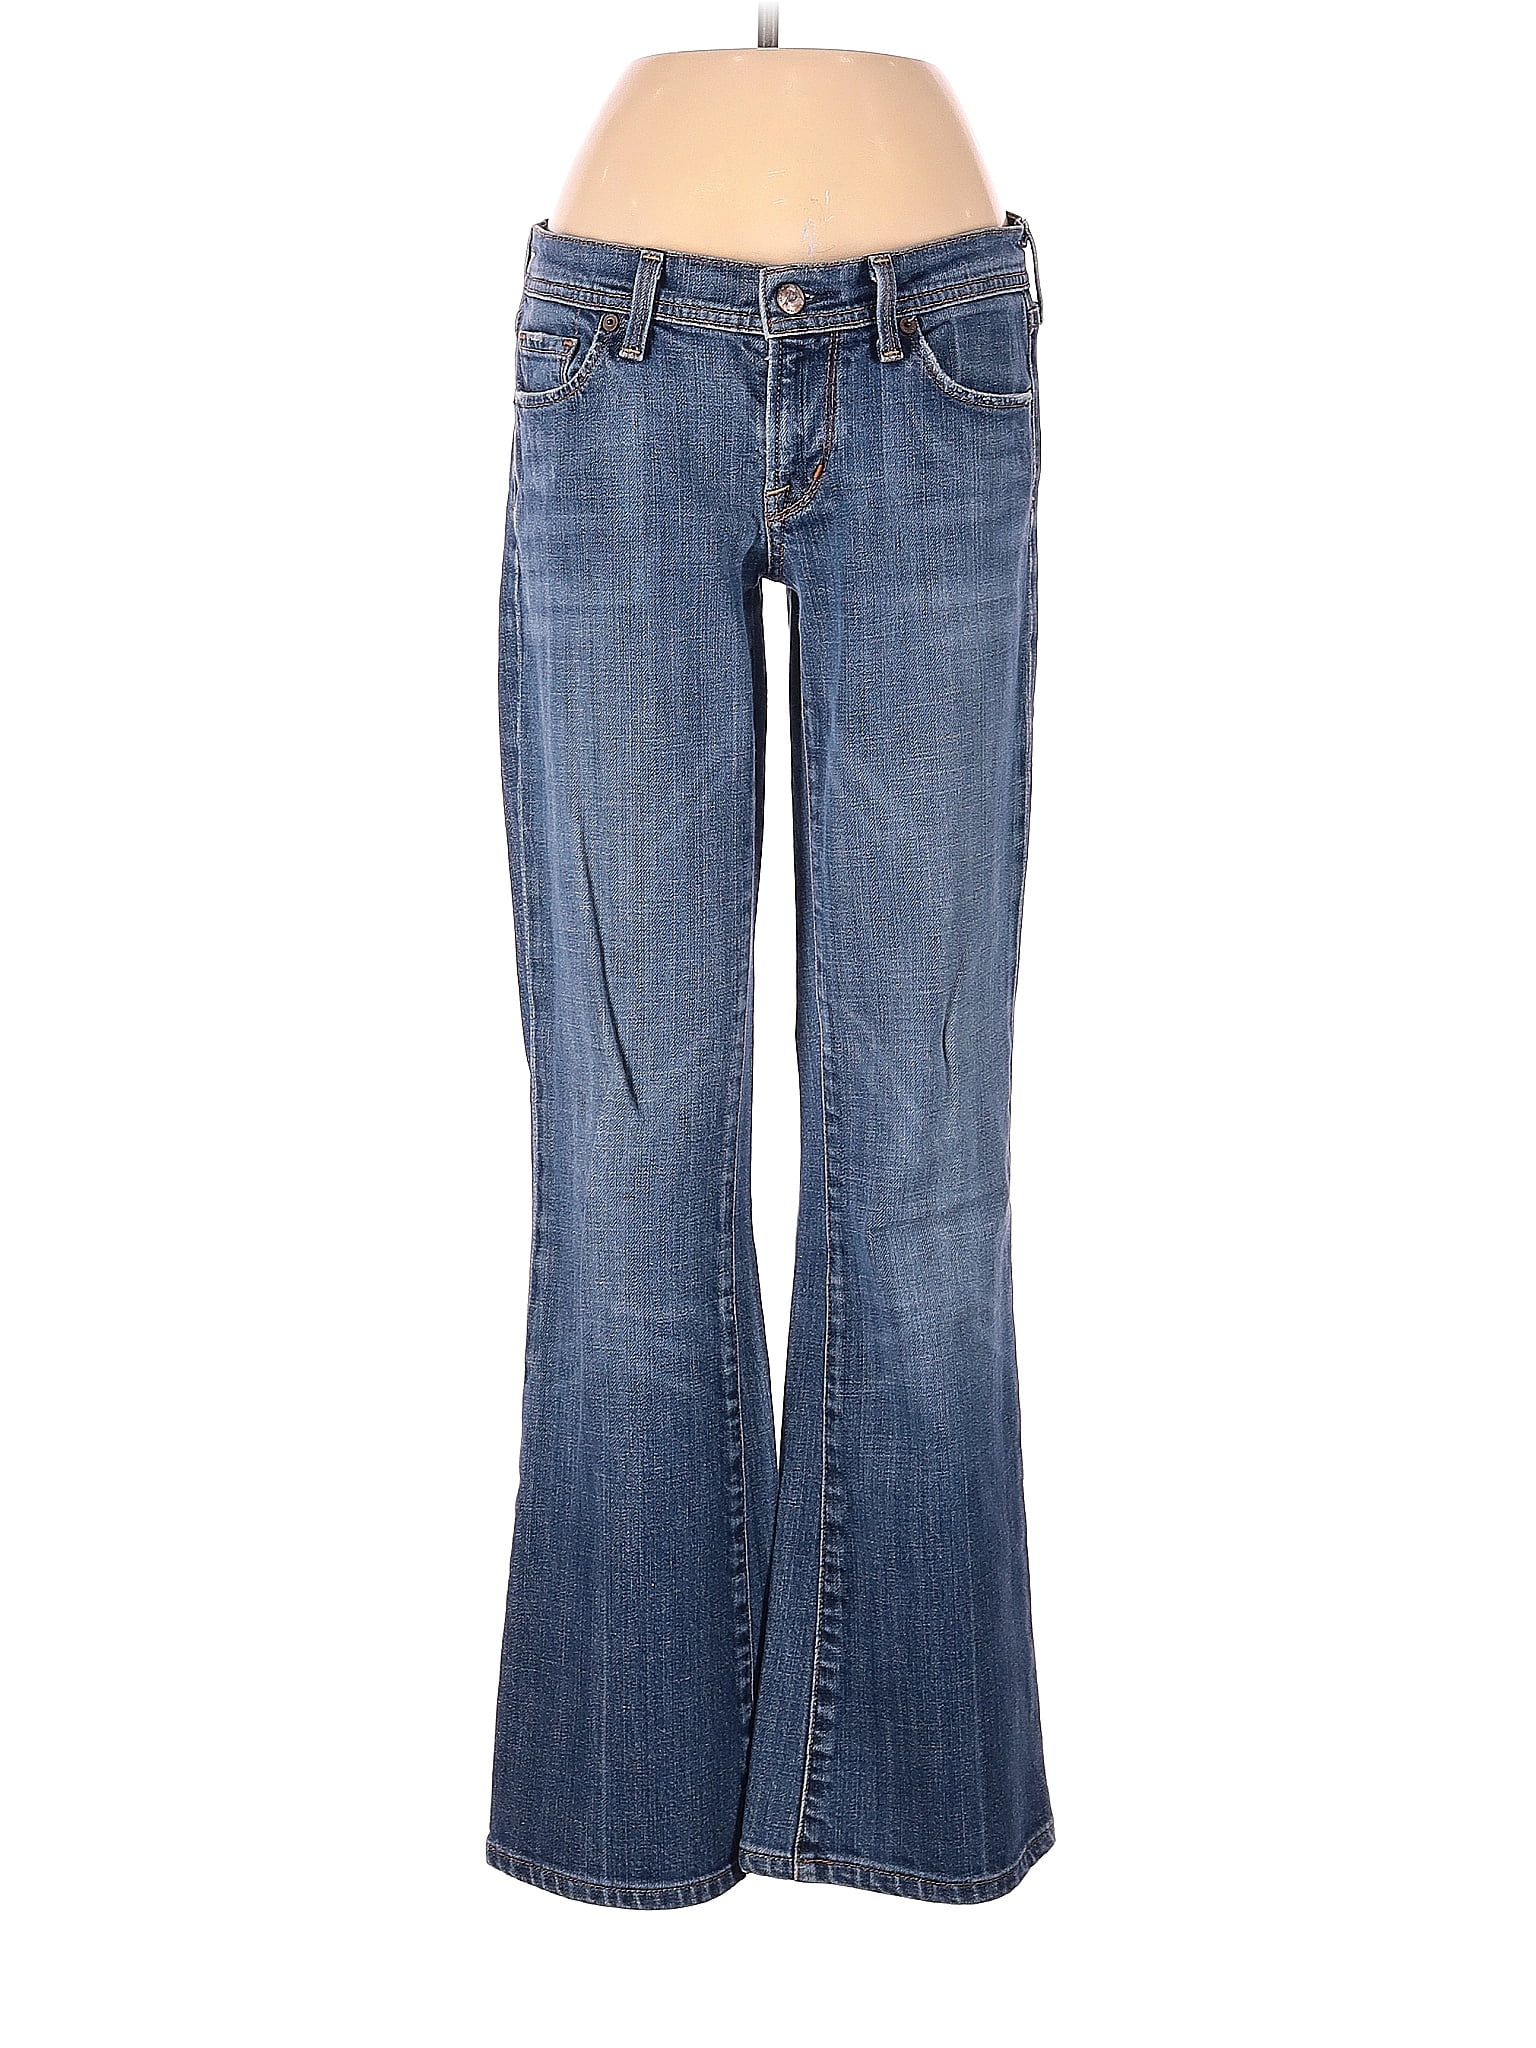 Citizens of Humanity Solid Blue Jeans 27 Waist - 80% off | thredUP